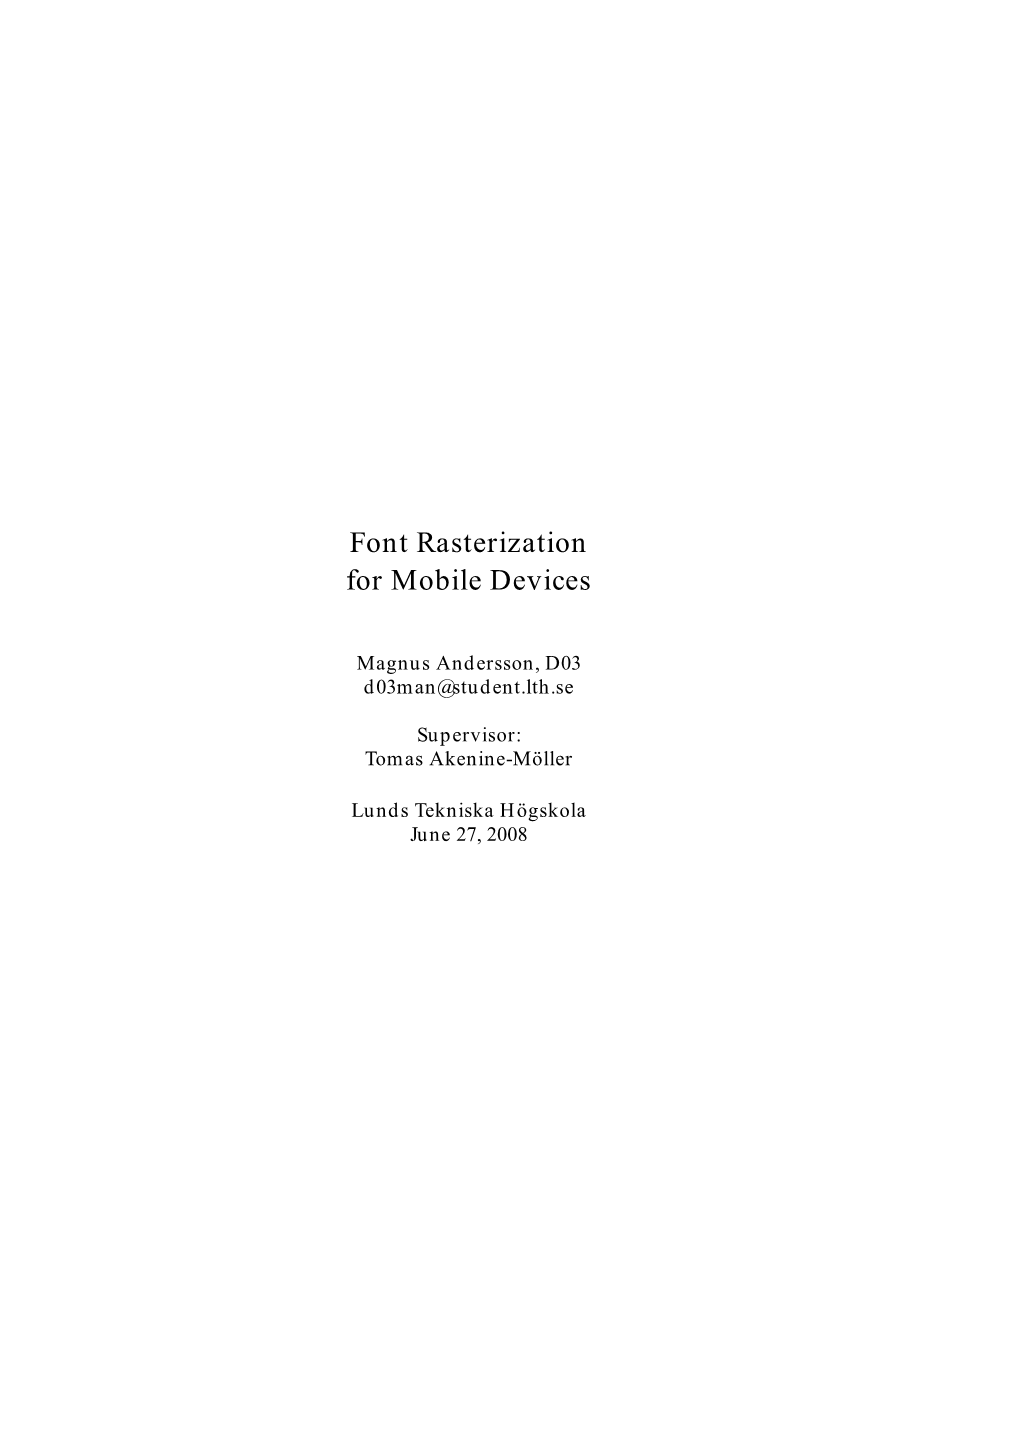 Font Rasterization for Mobile Devices